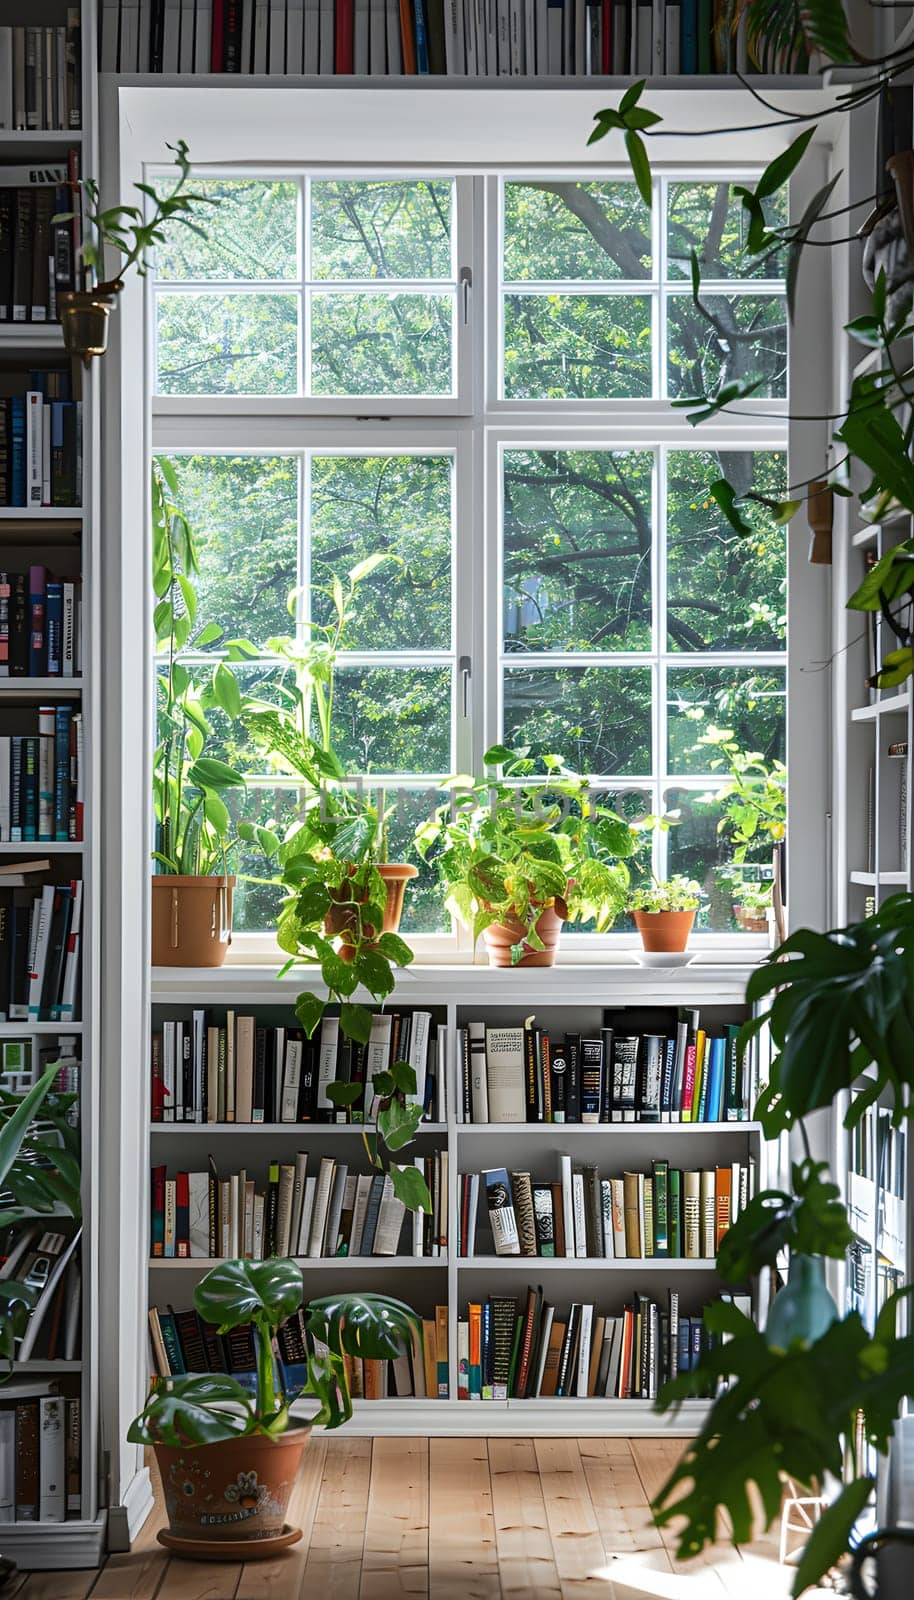 A building housing a vast library with bookshelves stretching towards a window, adorned with potted plants adding a touch of botany to the fixture